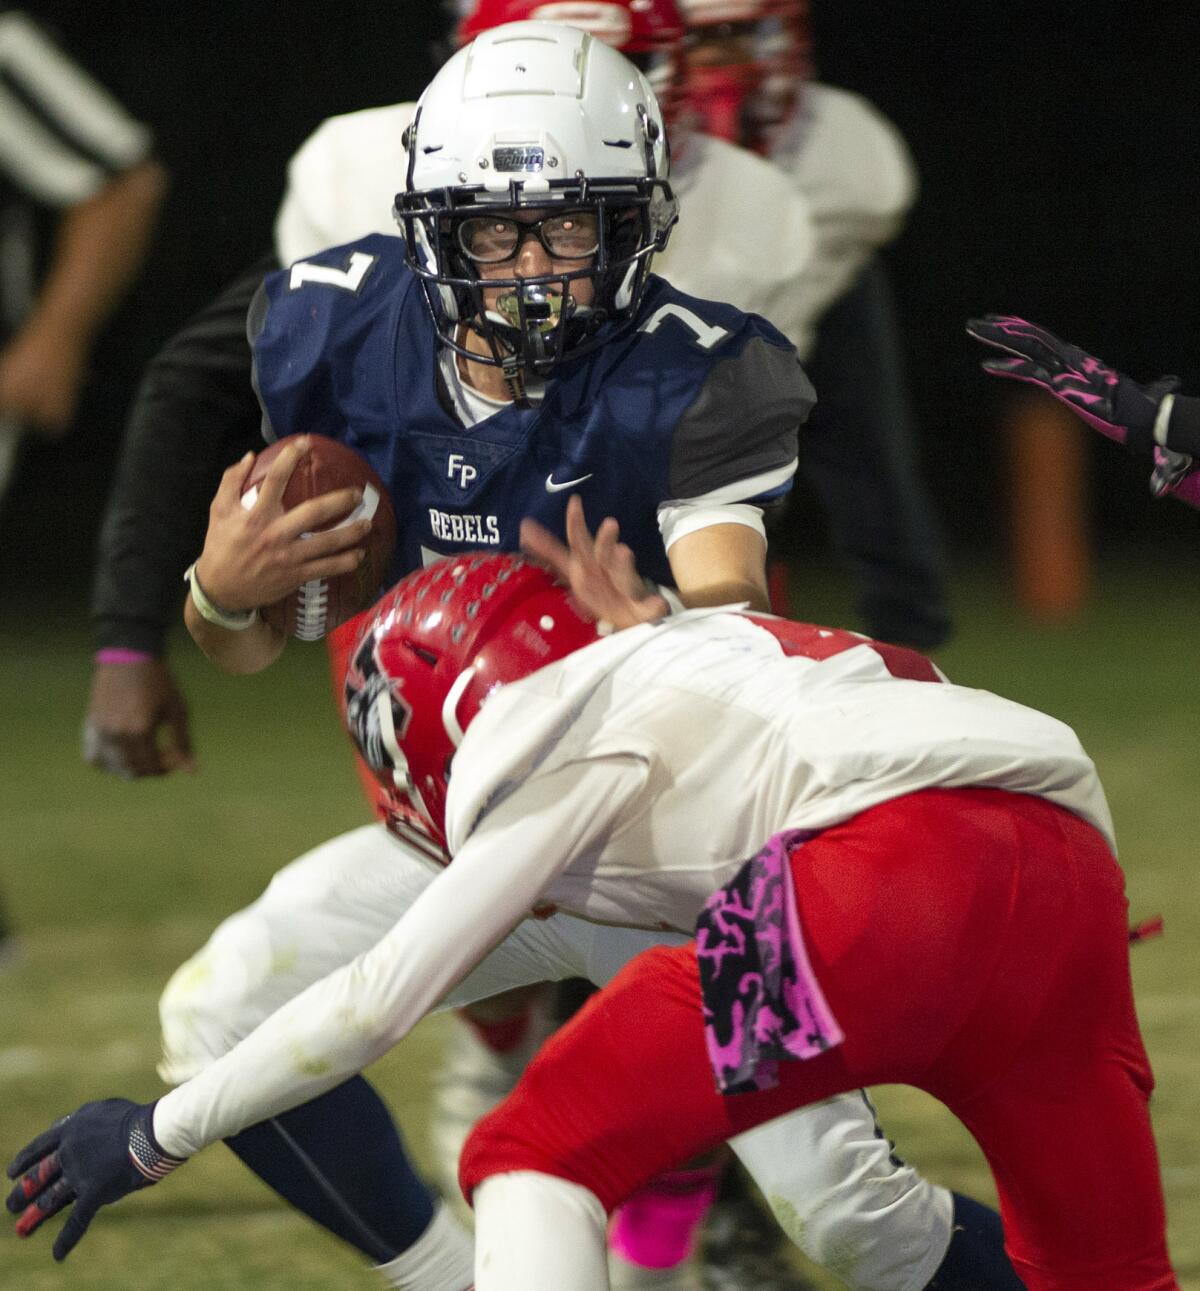 Flintridge Prep’s Alexander Payne trie to avoid Riverside County Education Academy’s Sonny Dimmick on a carry during Friday's game. (Photo by Miguel Vasconcellos)